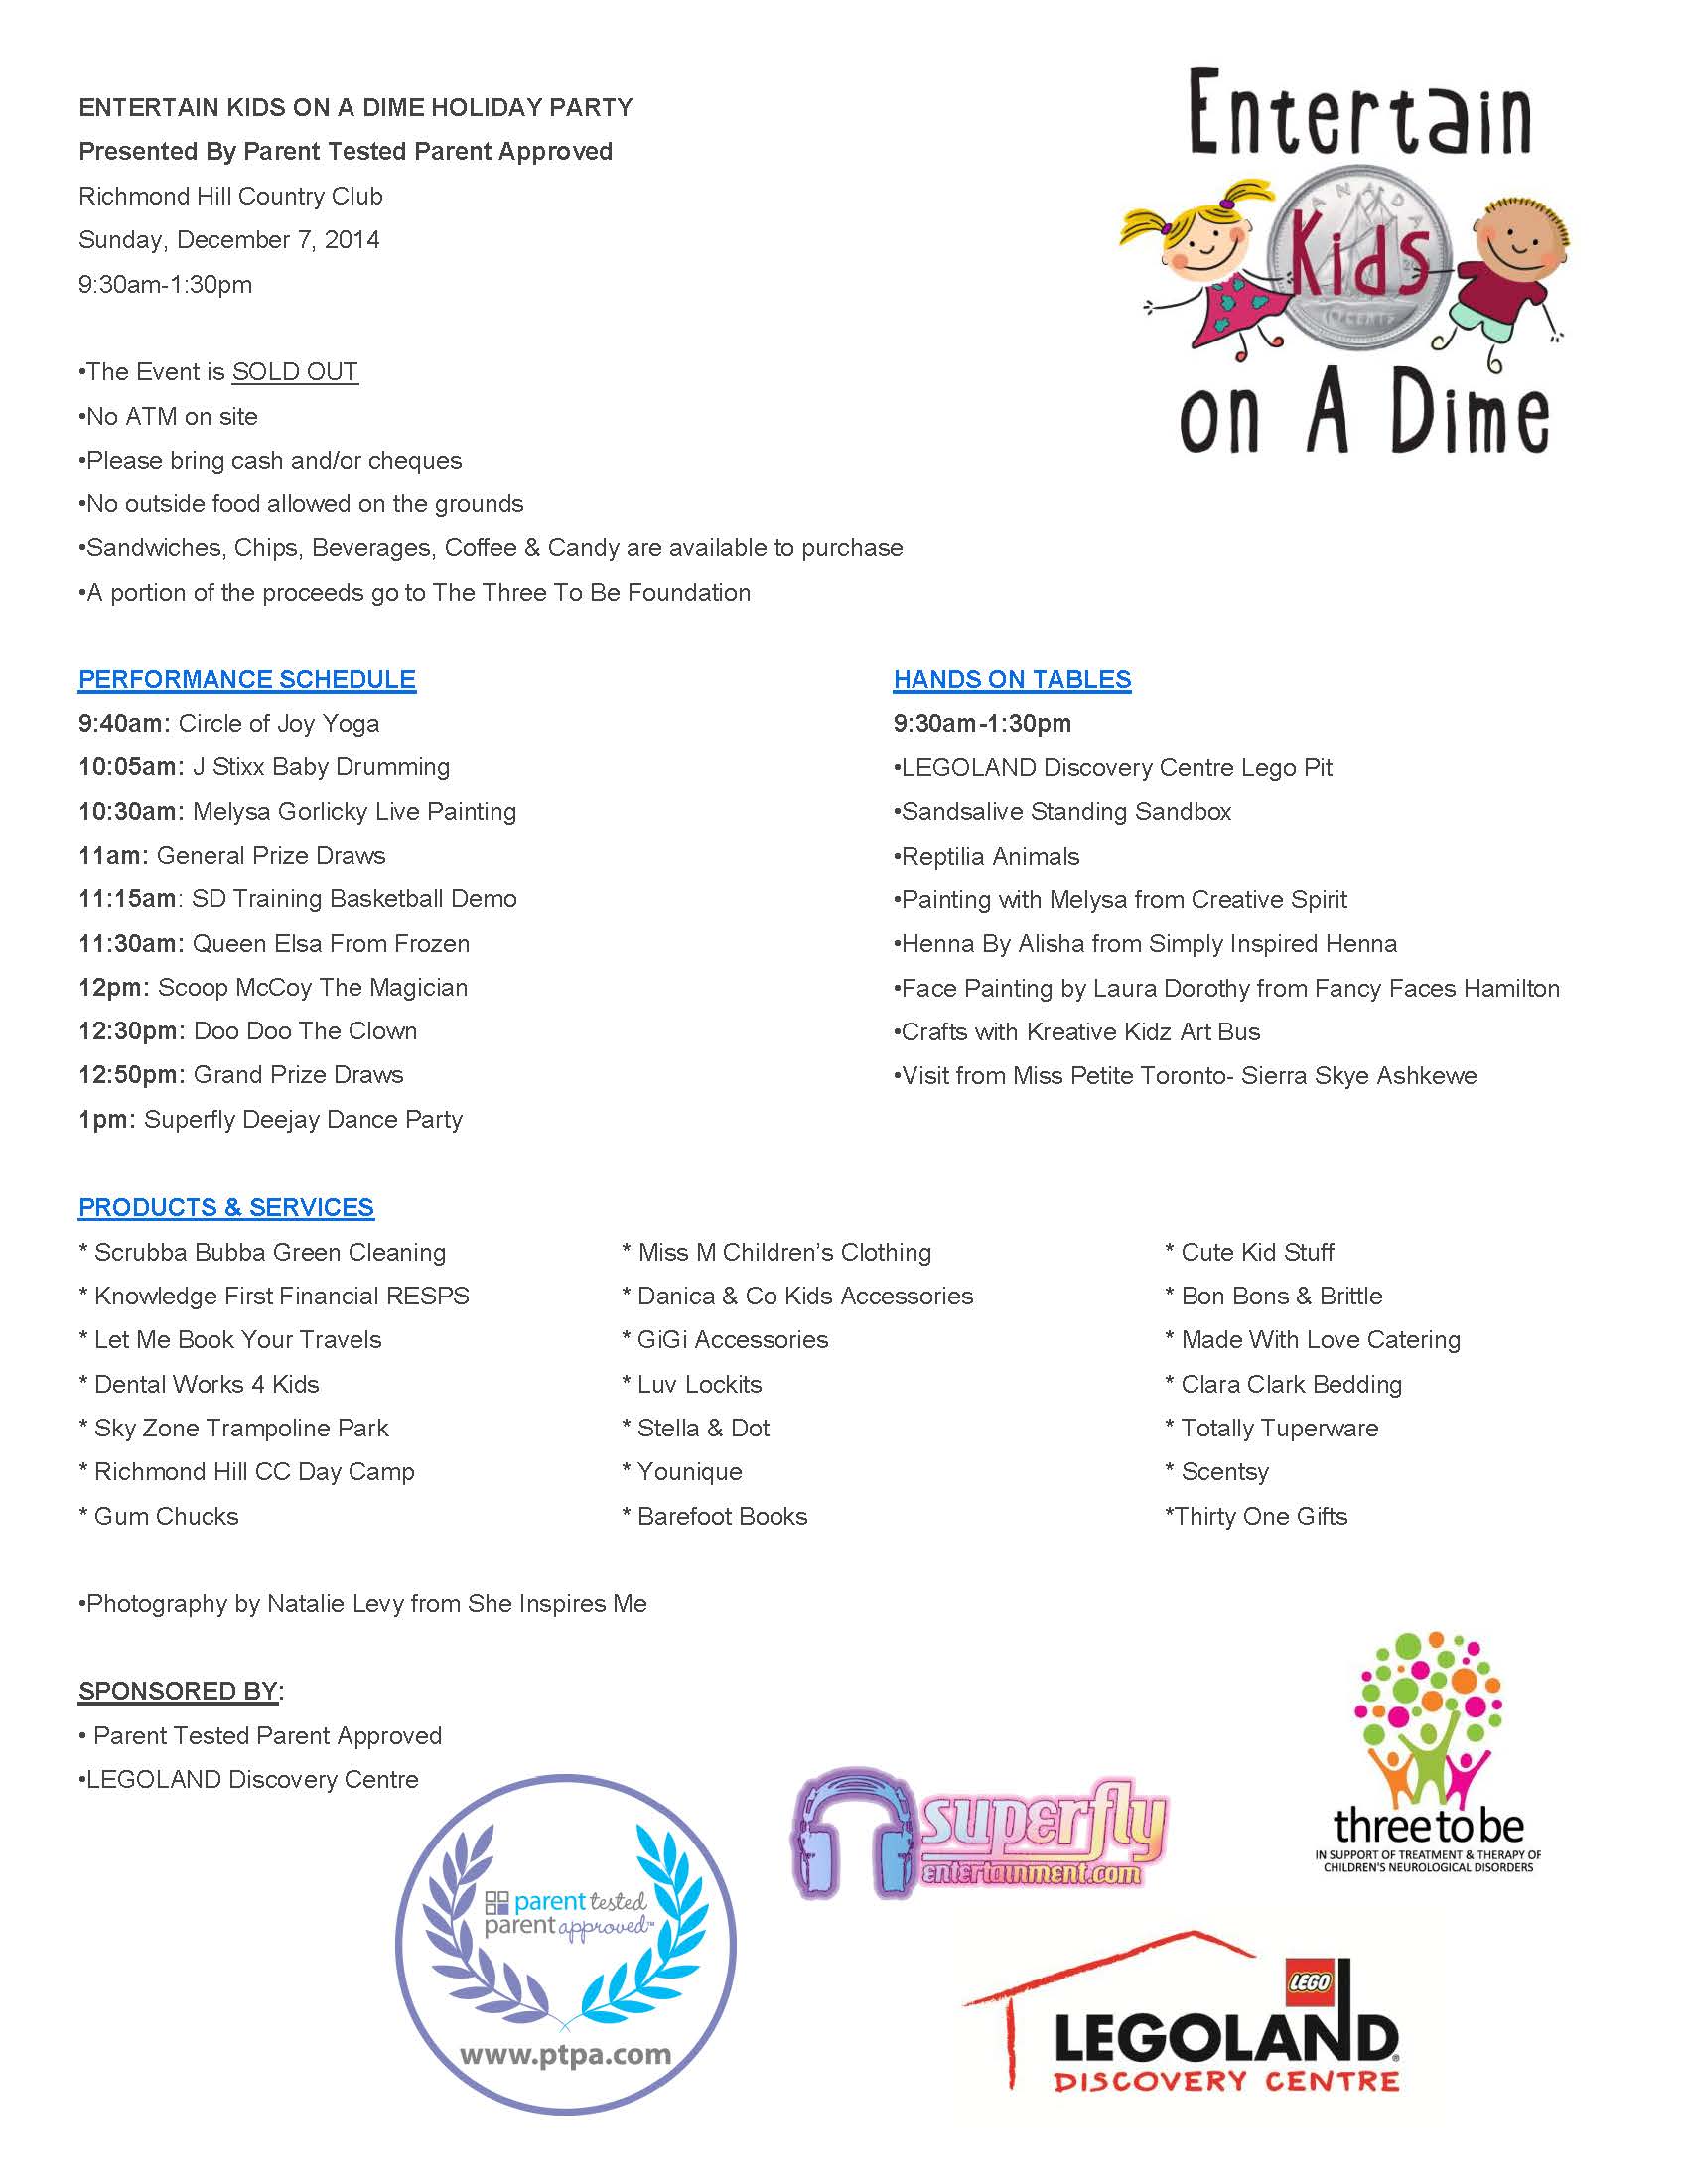 ENTERTAIN KIDS ON A DIME HOLIDAY PARTY PROGRAM